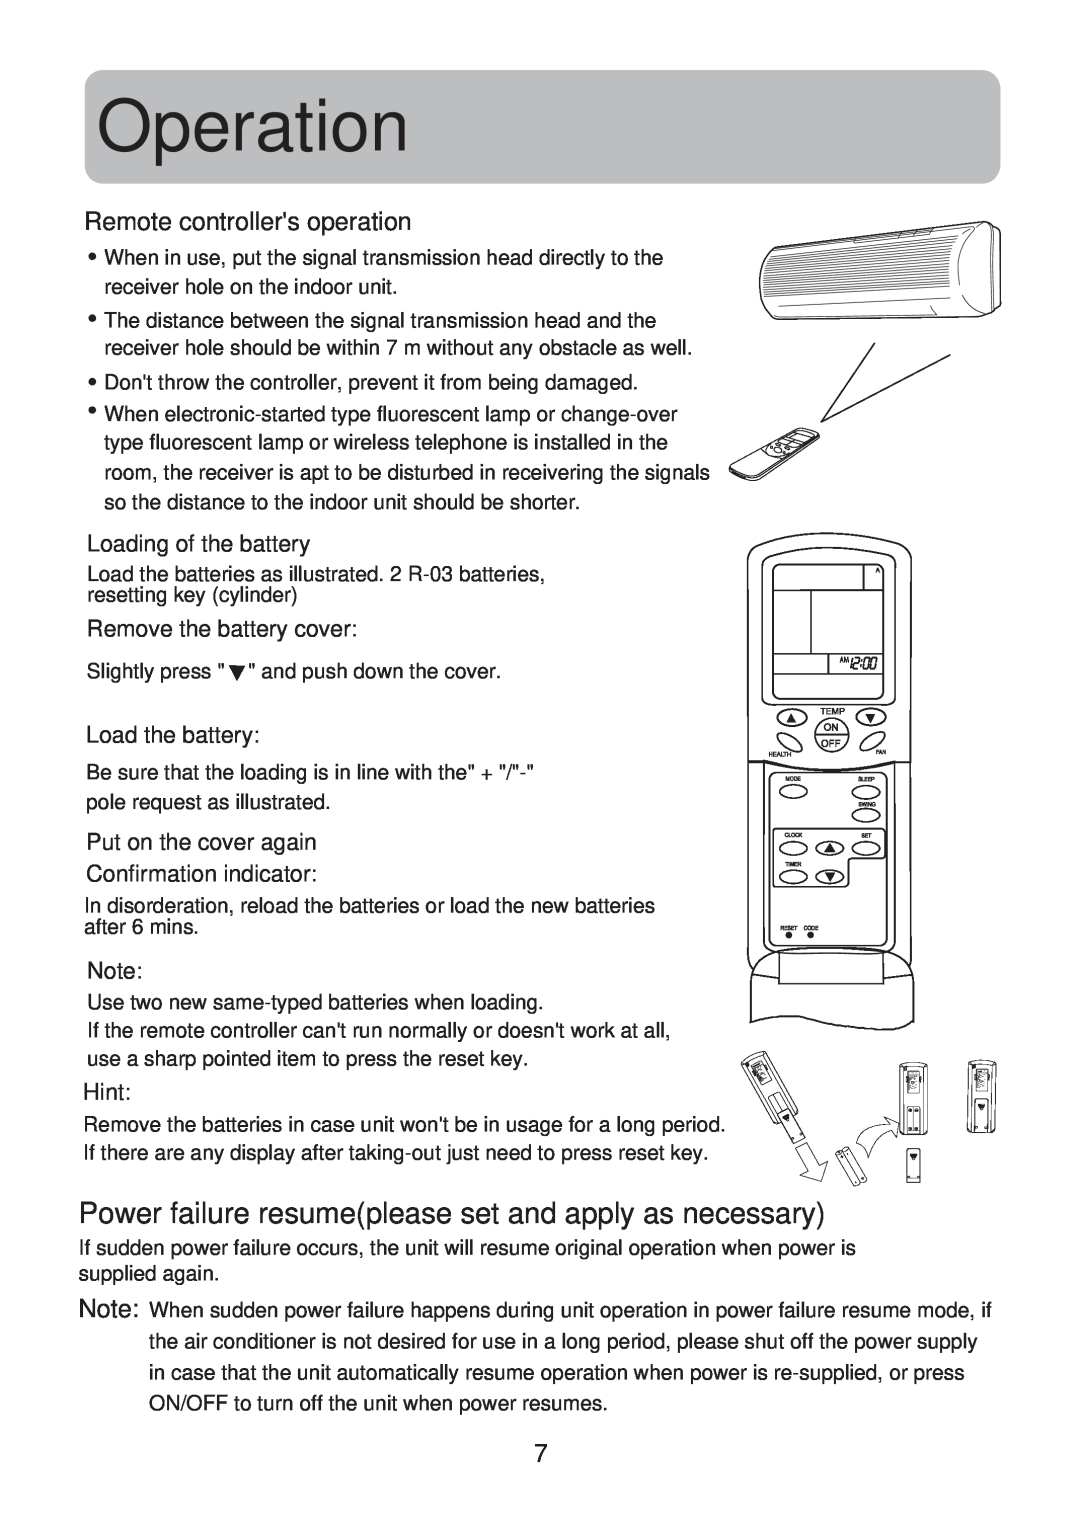 Haier HSU-18CK13(T3) operation manual Operation, Remote controllers operation 